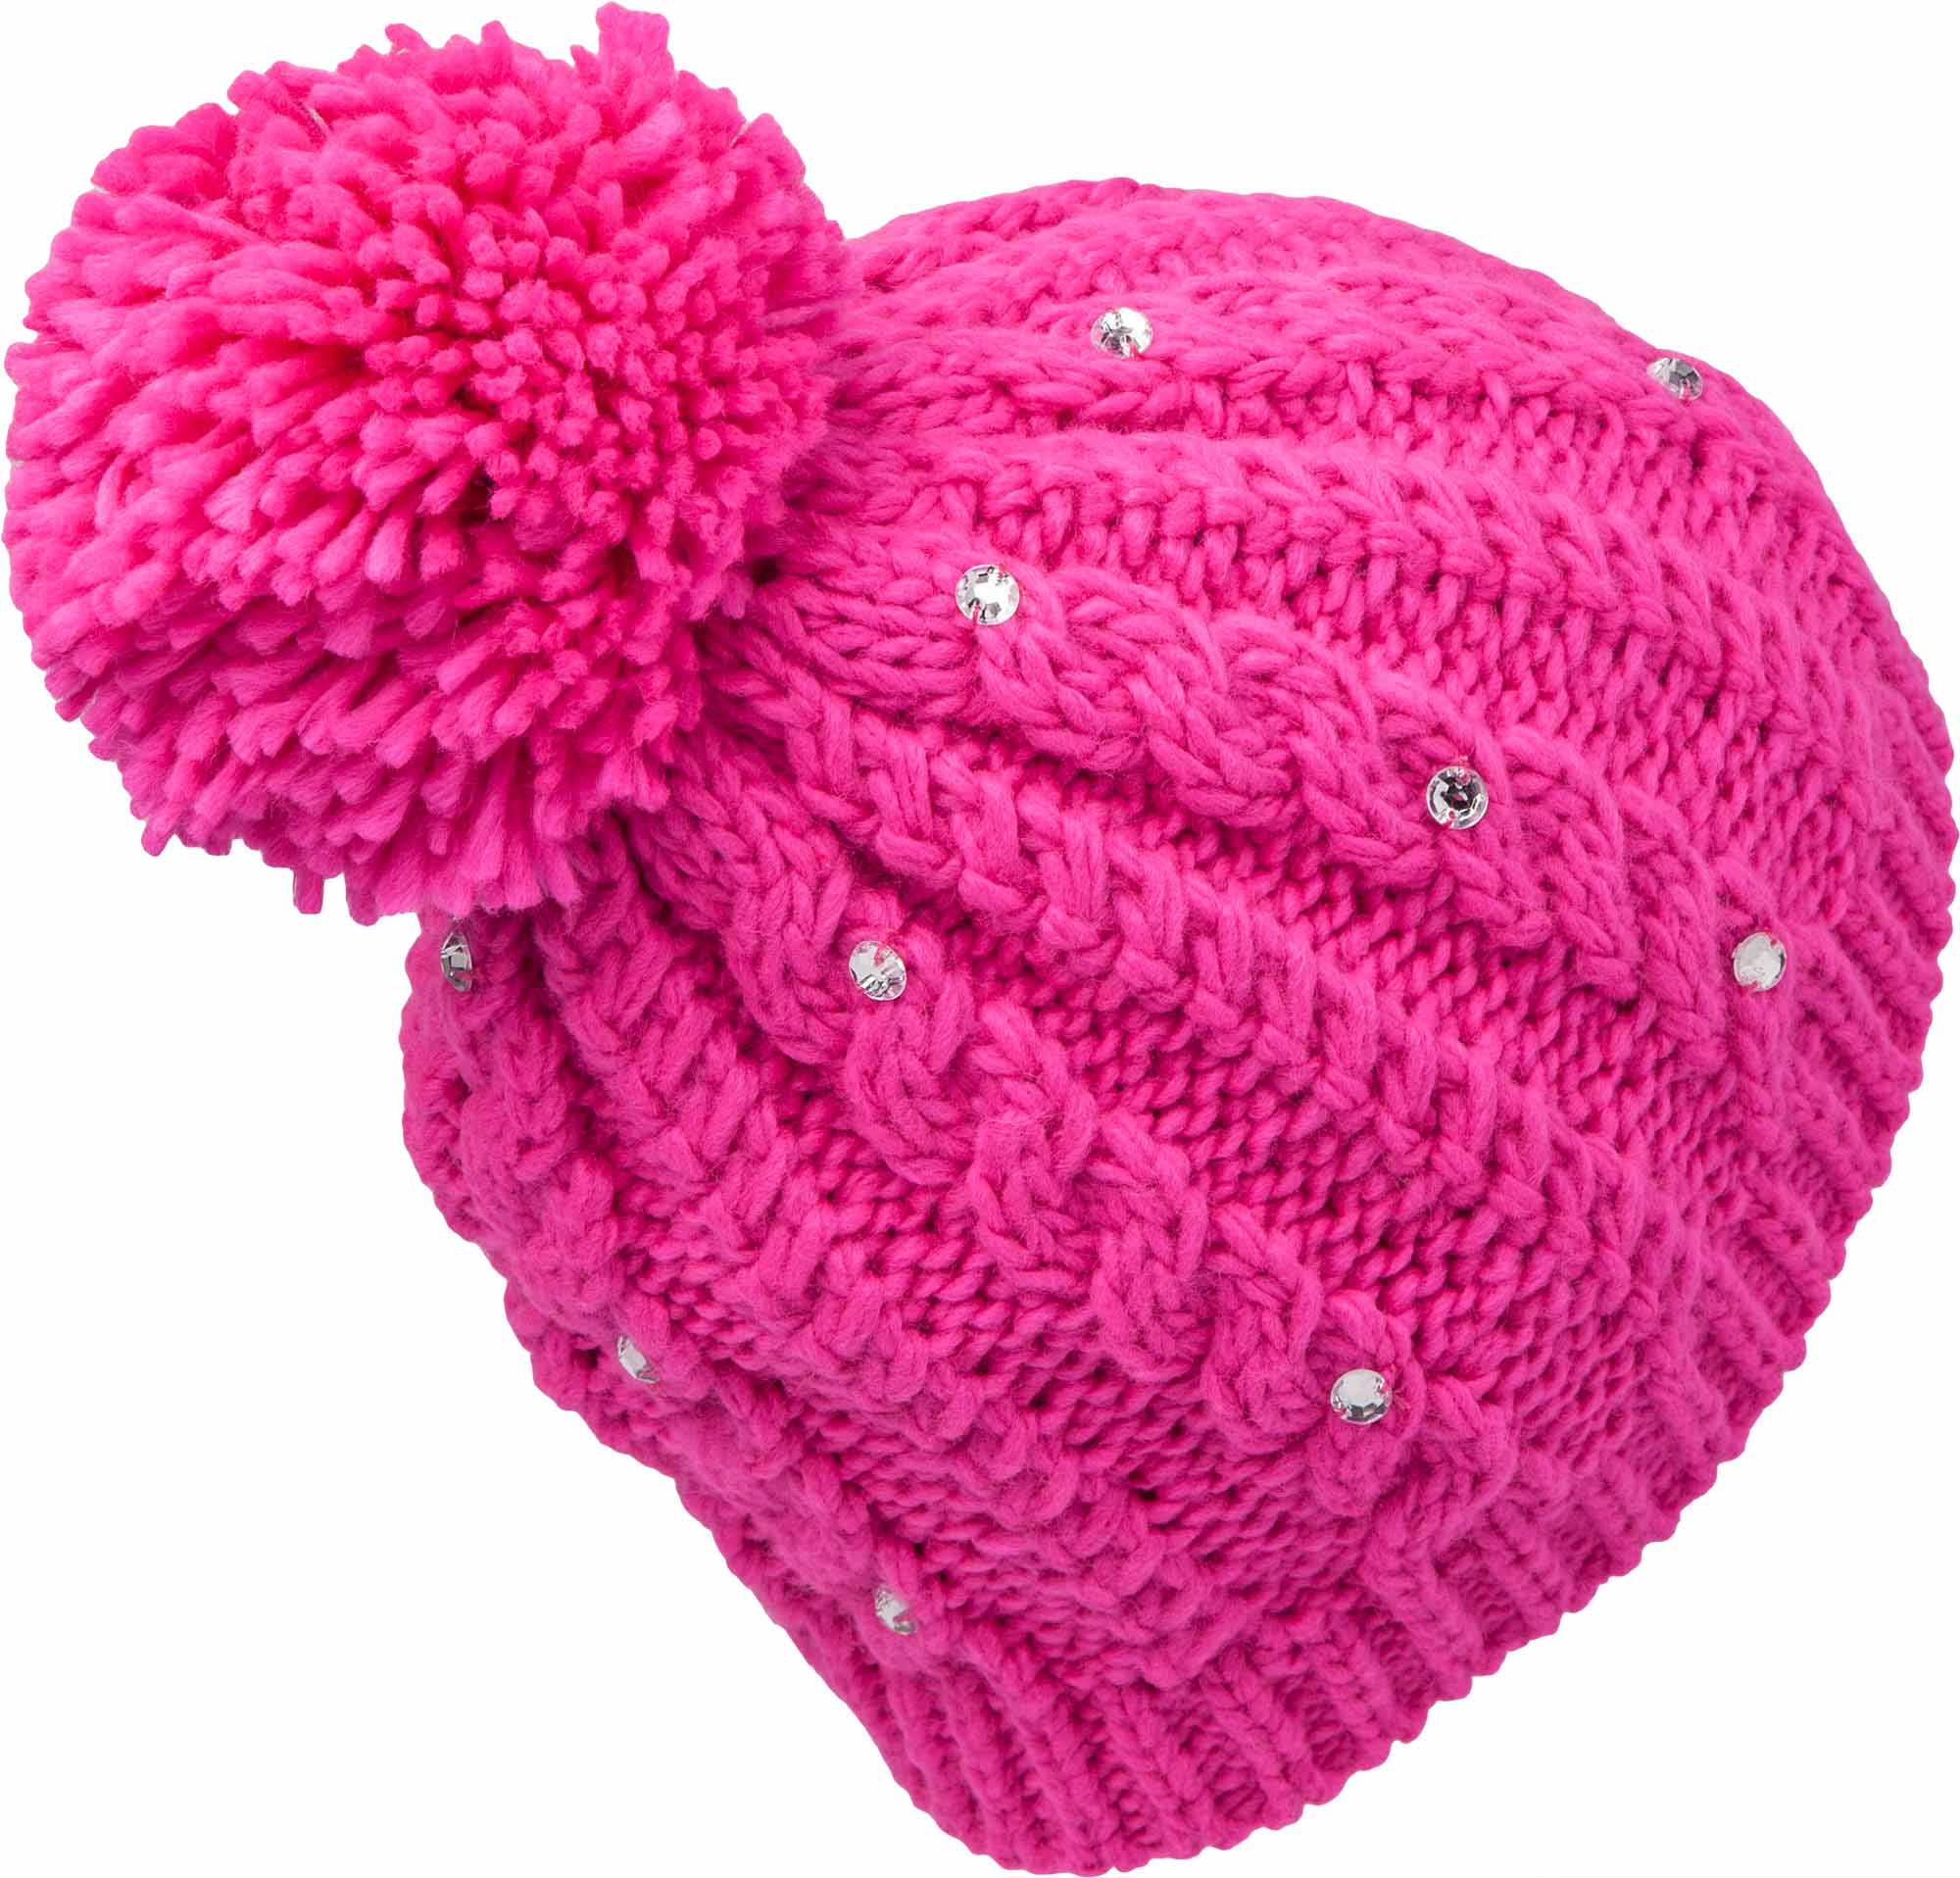 Girls’ knitted hat